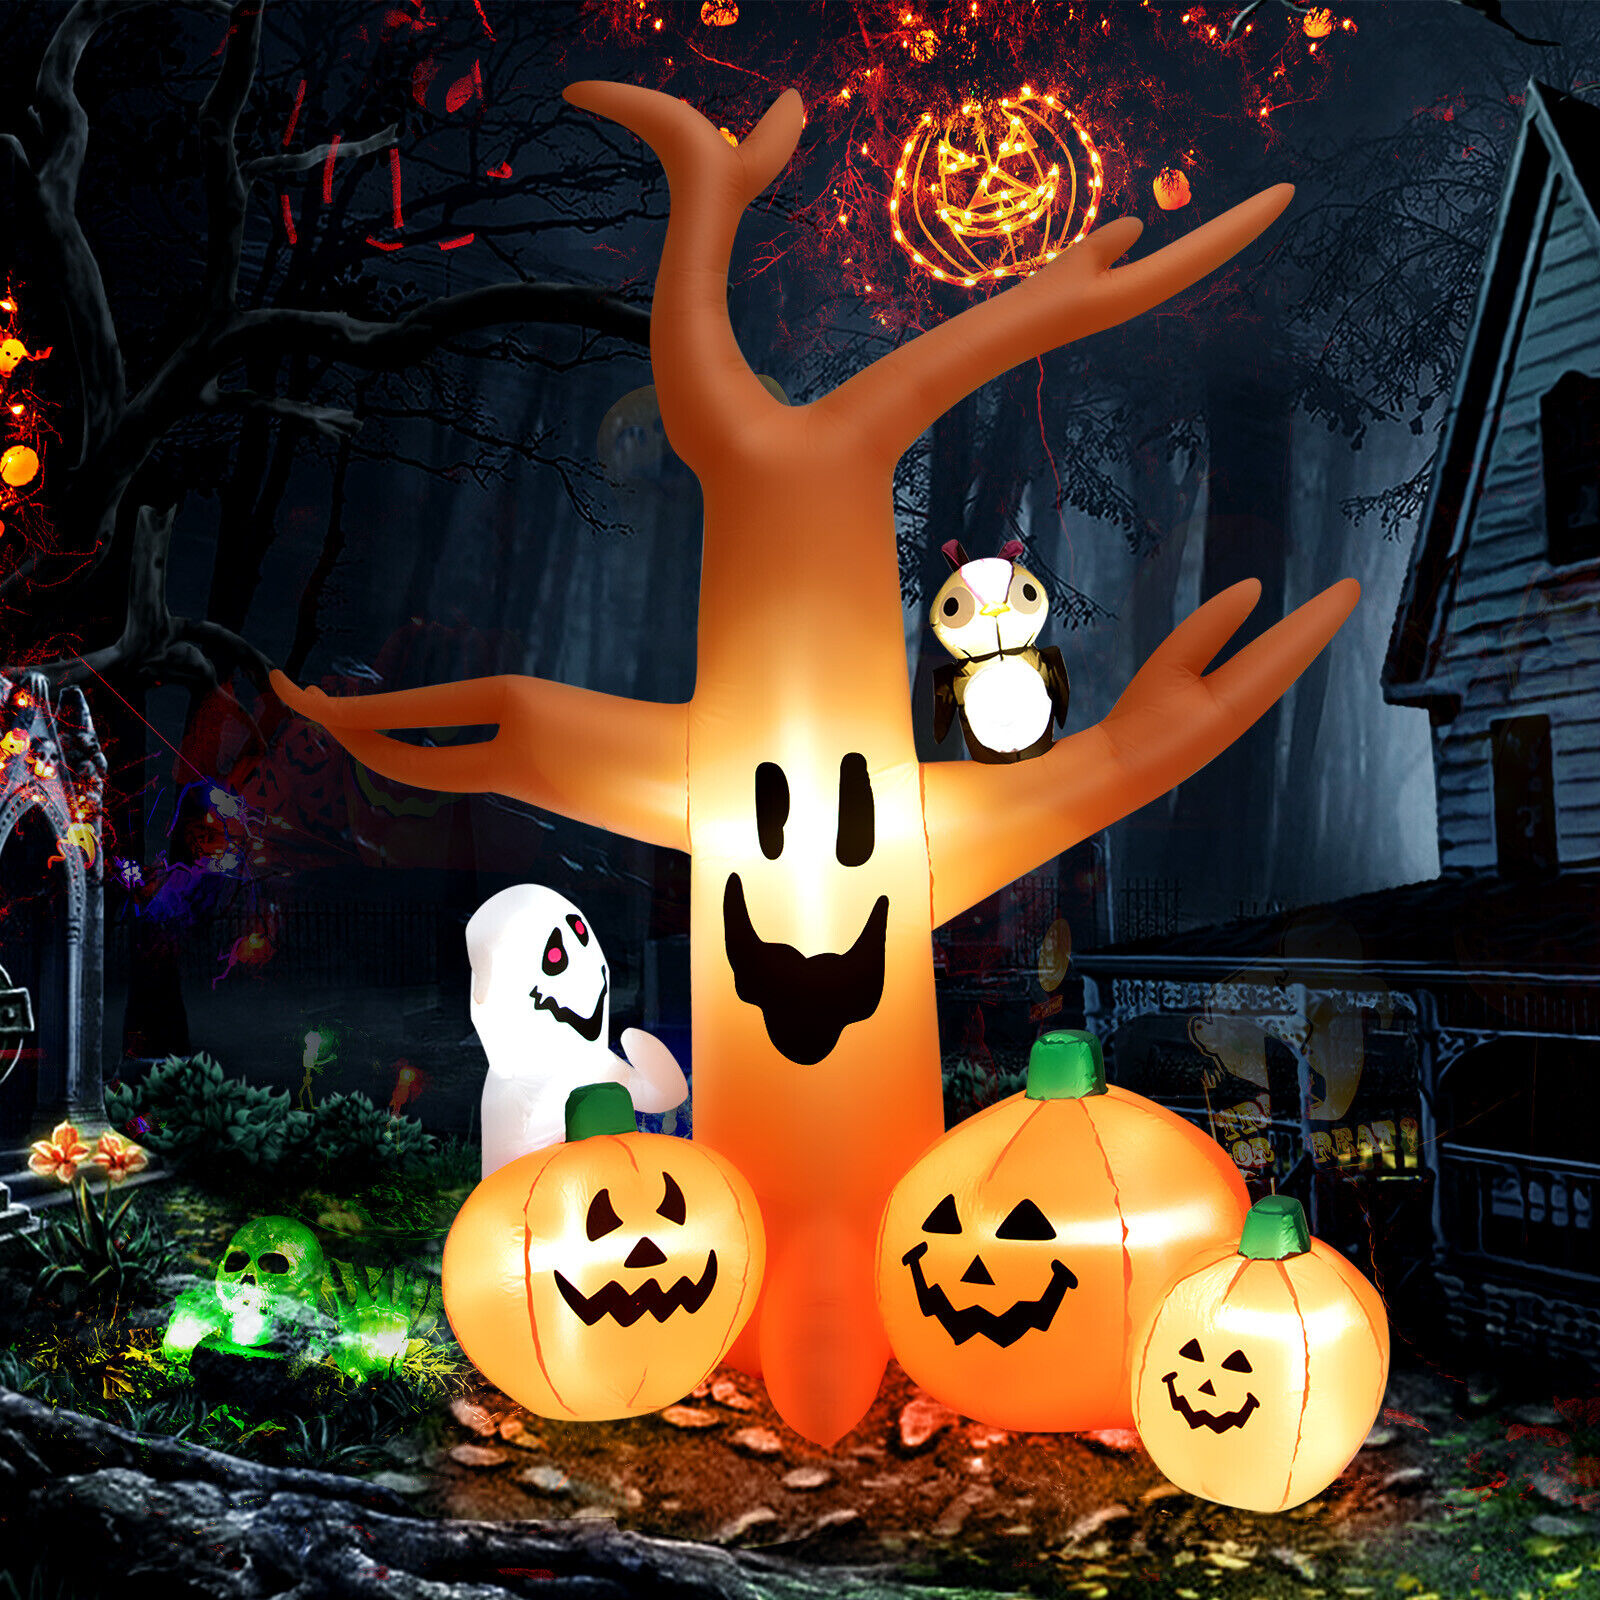 8 FT Halloween Inflatable Dead Tree w/ Pumpkins Blow up Yard Decoration